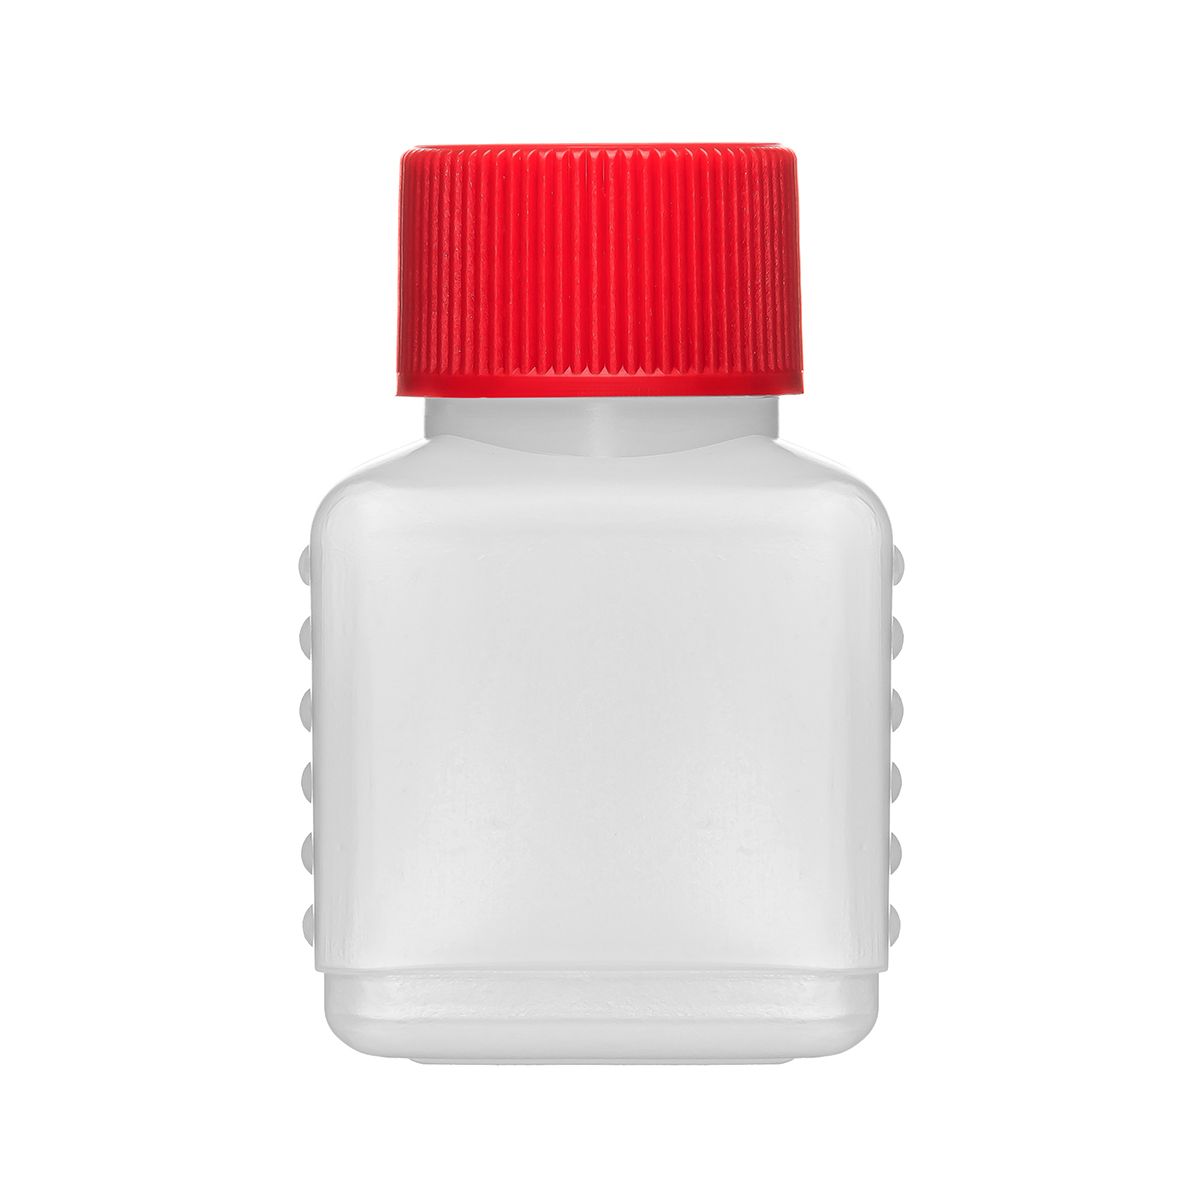 The 50 ml HDPE bottle Quadro 50  is perfect choice for small sizes  in cosmetic industry or household chemicals.  This series of bottles is presented in different volumes: 50 ml and 1000 ml. by Pack Store Europe, packstore.eu